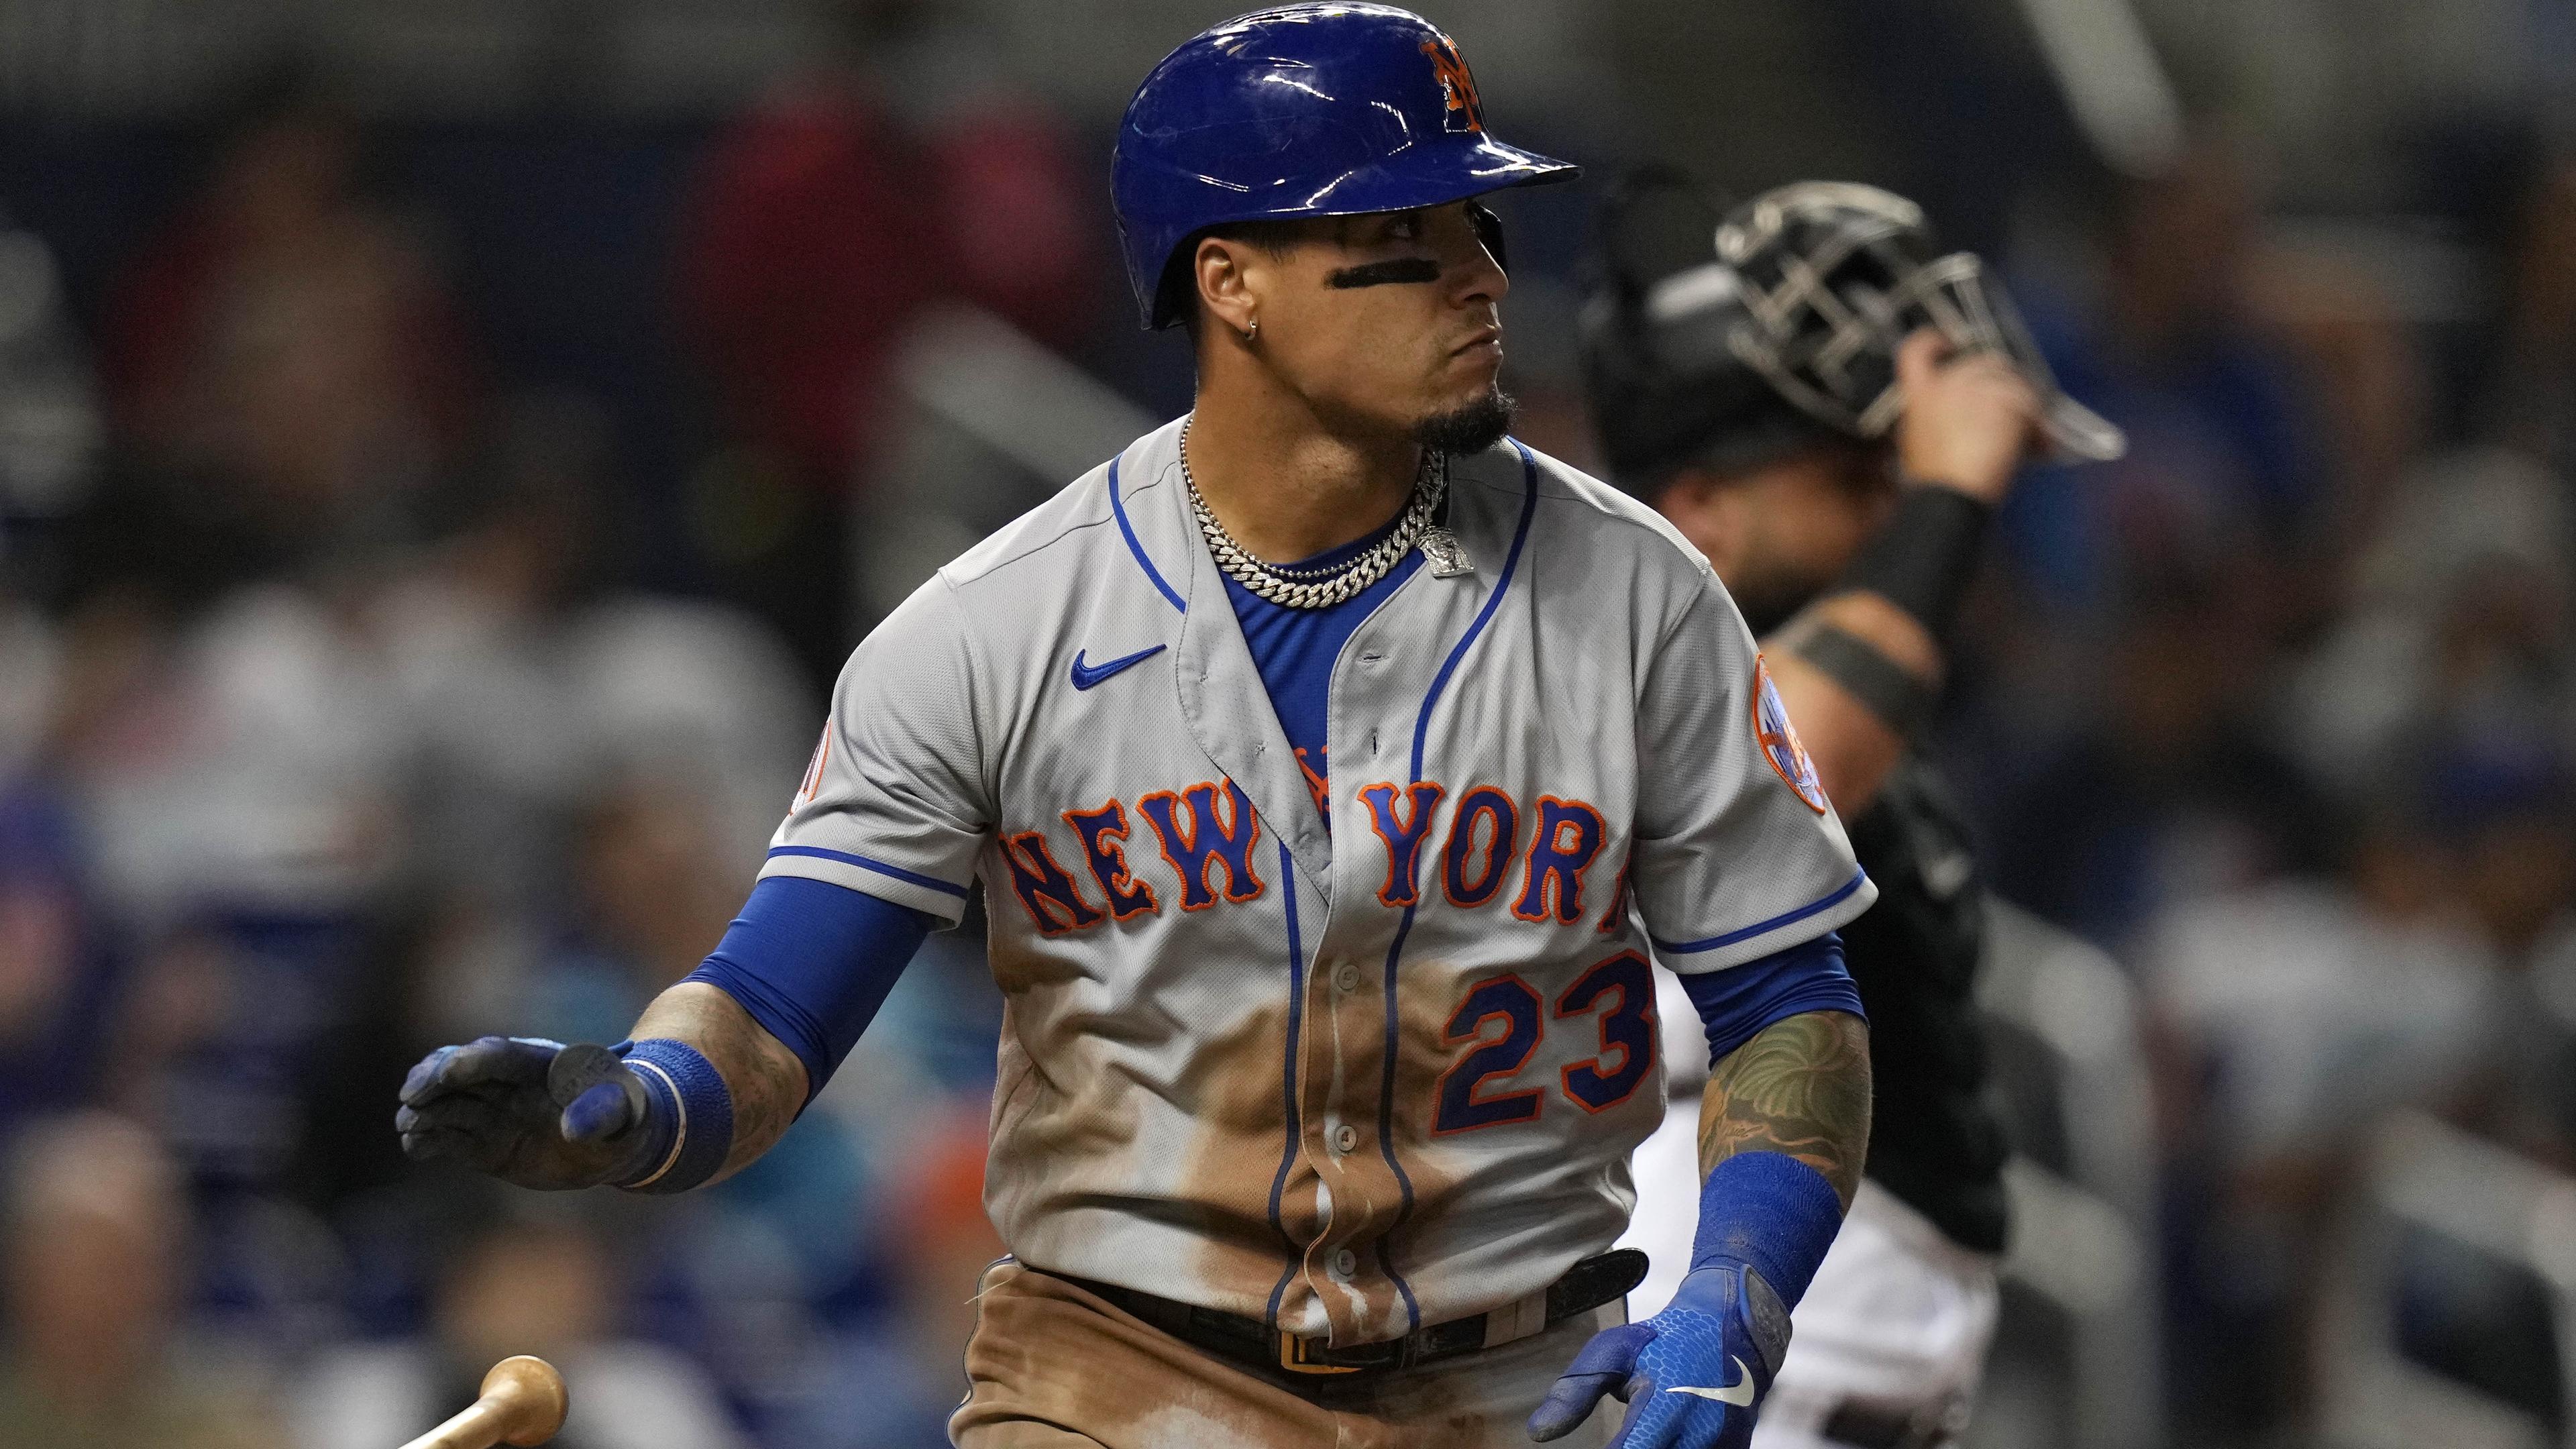 Sep 9, 2021; Miami, Florida, USA; New York Mets second baseman Javier Baez (23) tosses his bat after hitting a solo homerun in the 3rd inning against the Miami Marlins at loanDepot park. / © Jasen Vinlove-USA TODAY Sports